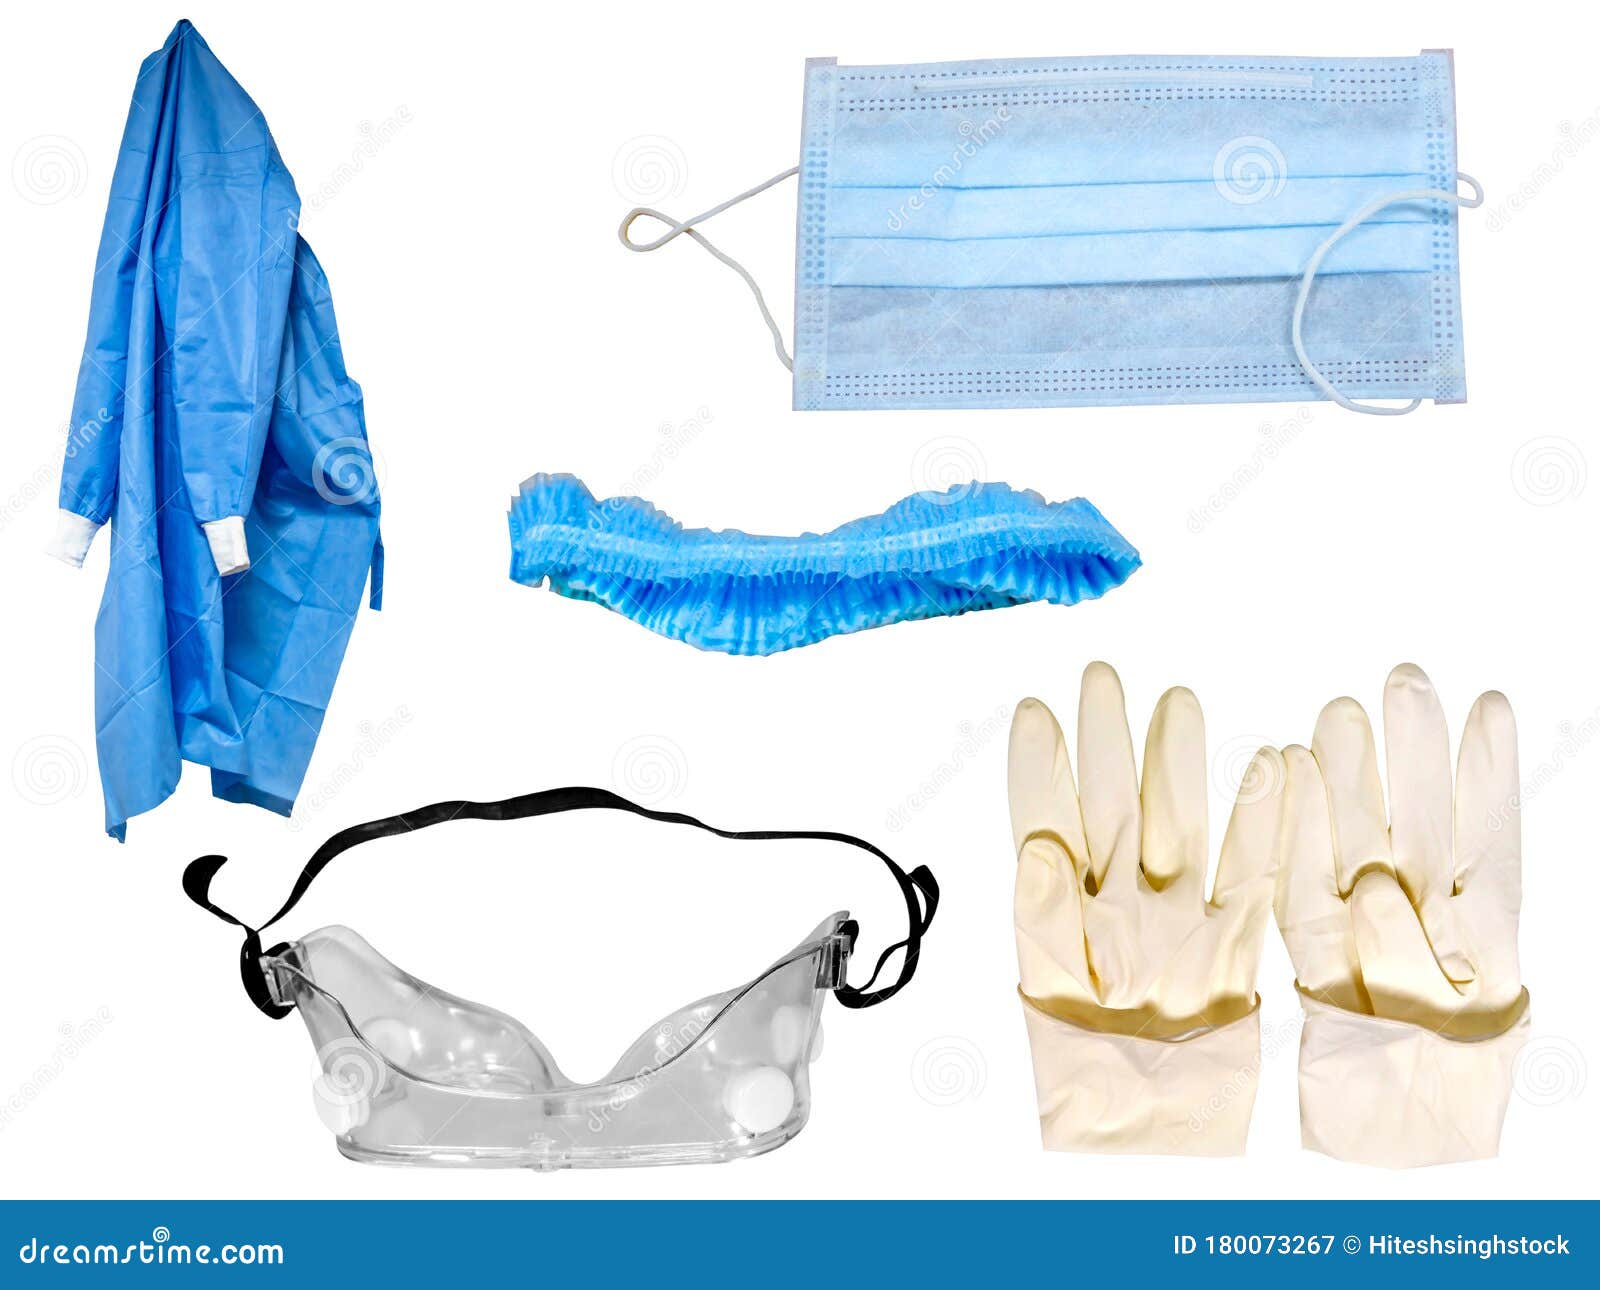 personal protective equipment ppe kit